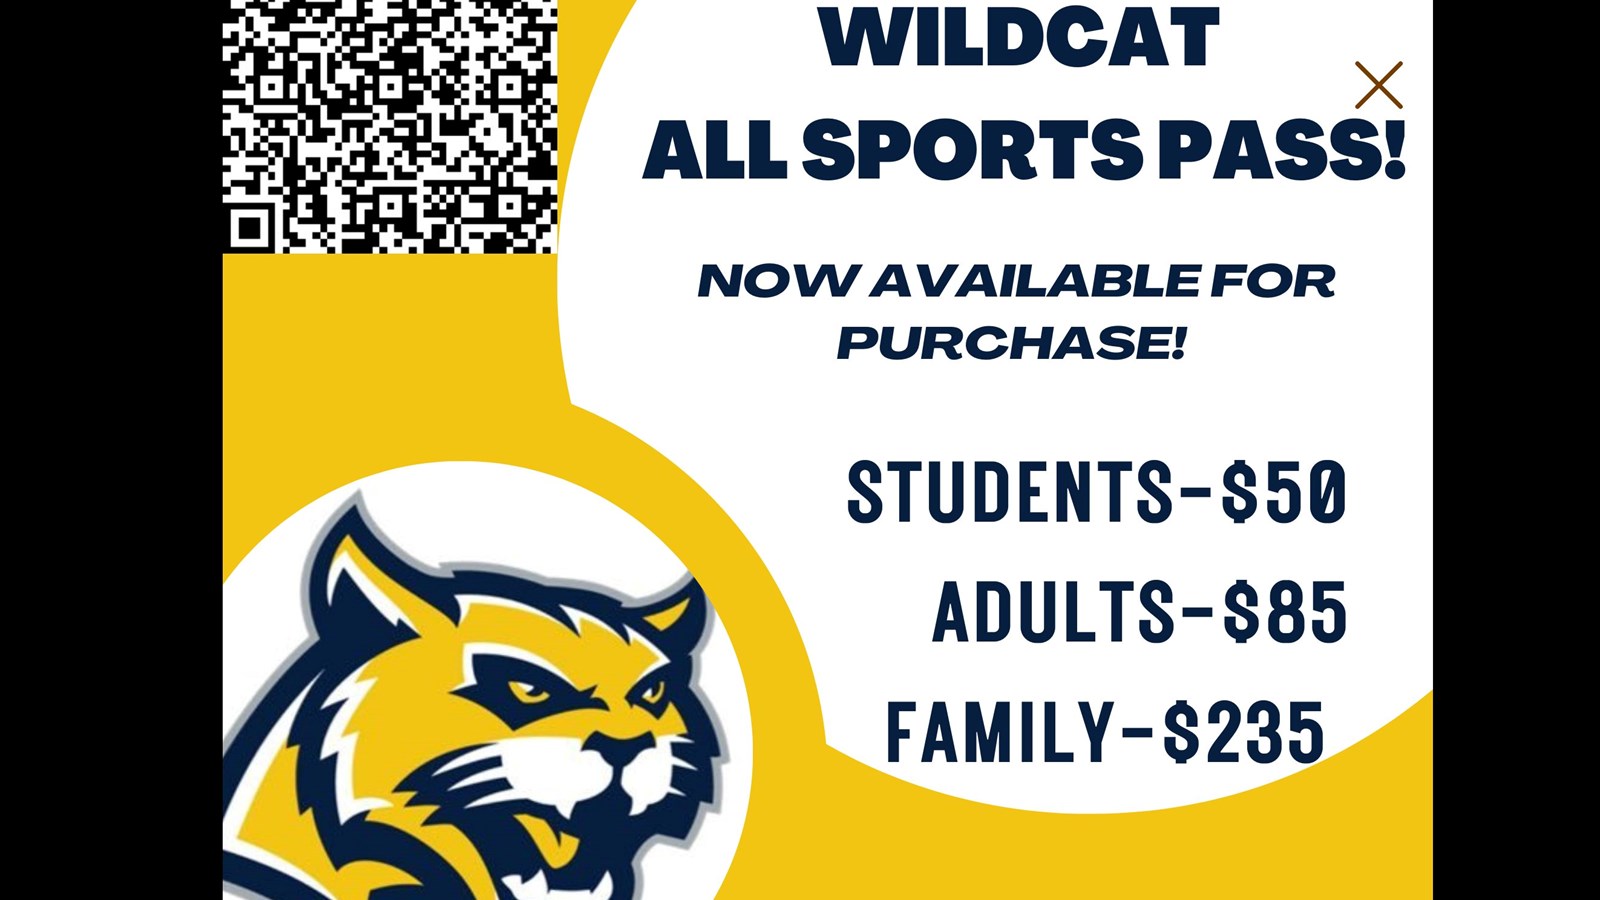 ALL SPORTS PASS AVAILABLE HERE!